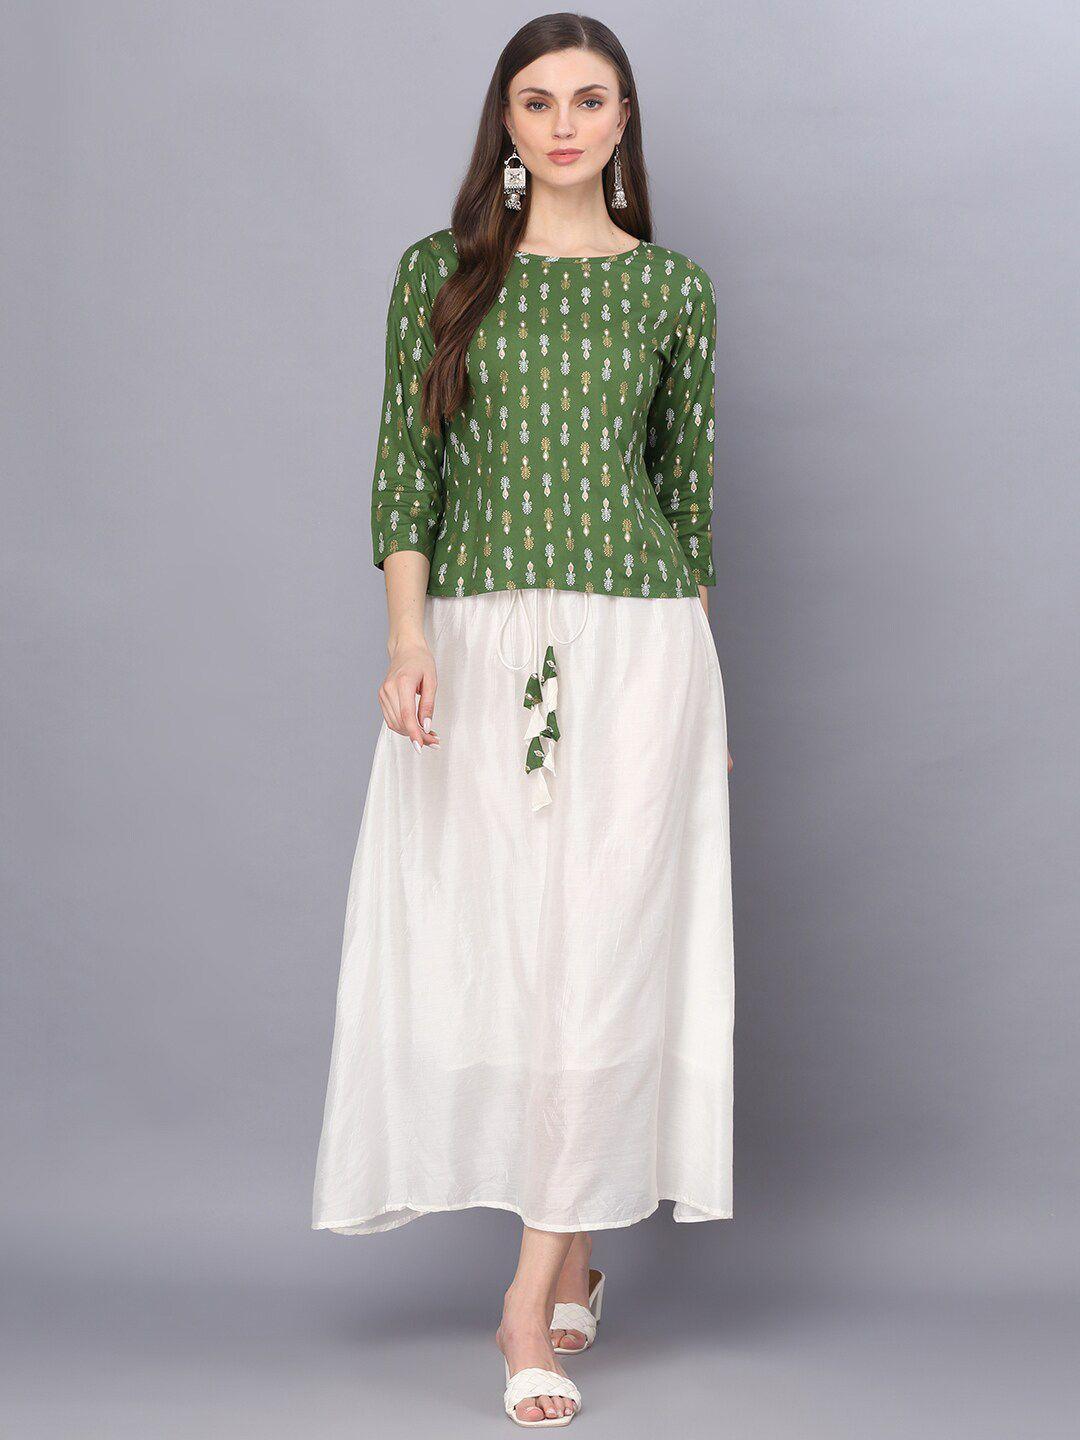 god bless green & white printed top with skirt